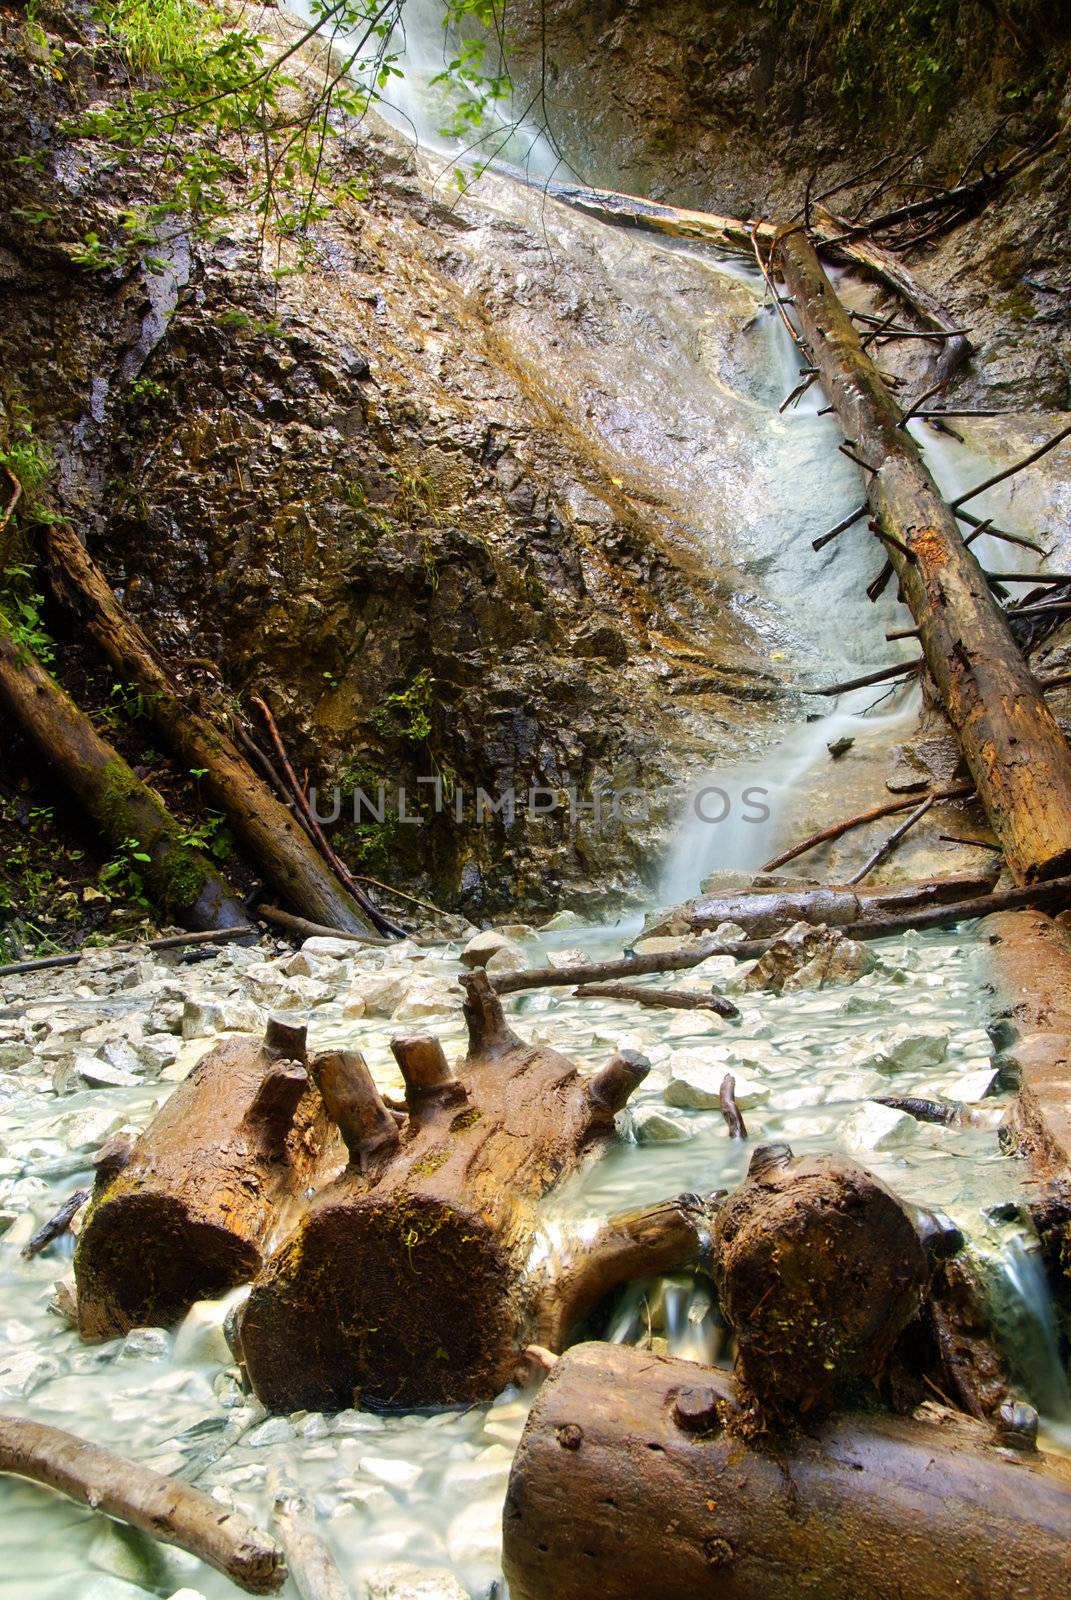 One of the many crystal clear waterfalls in the Slovakian paradise natural park with wooden logs in the front